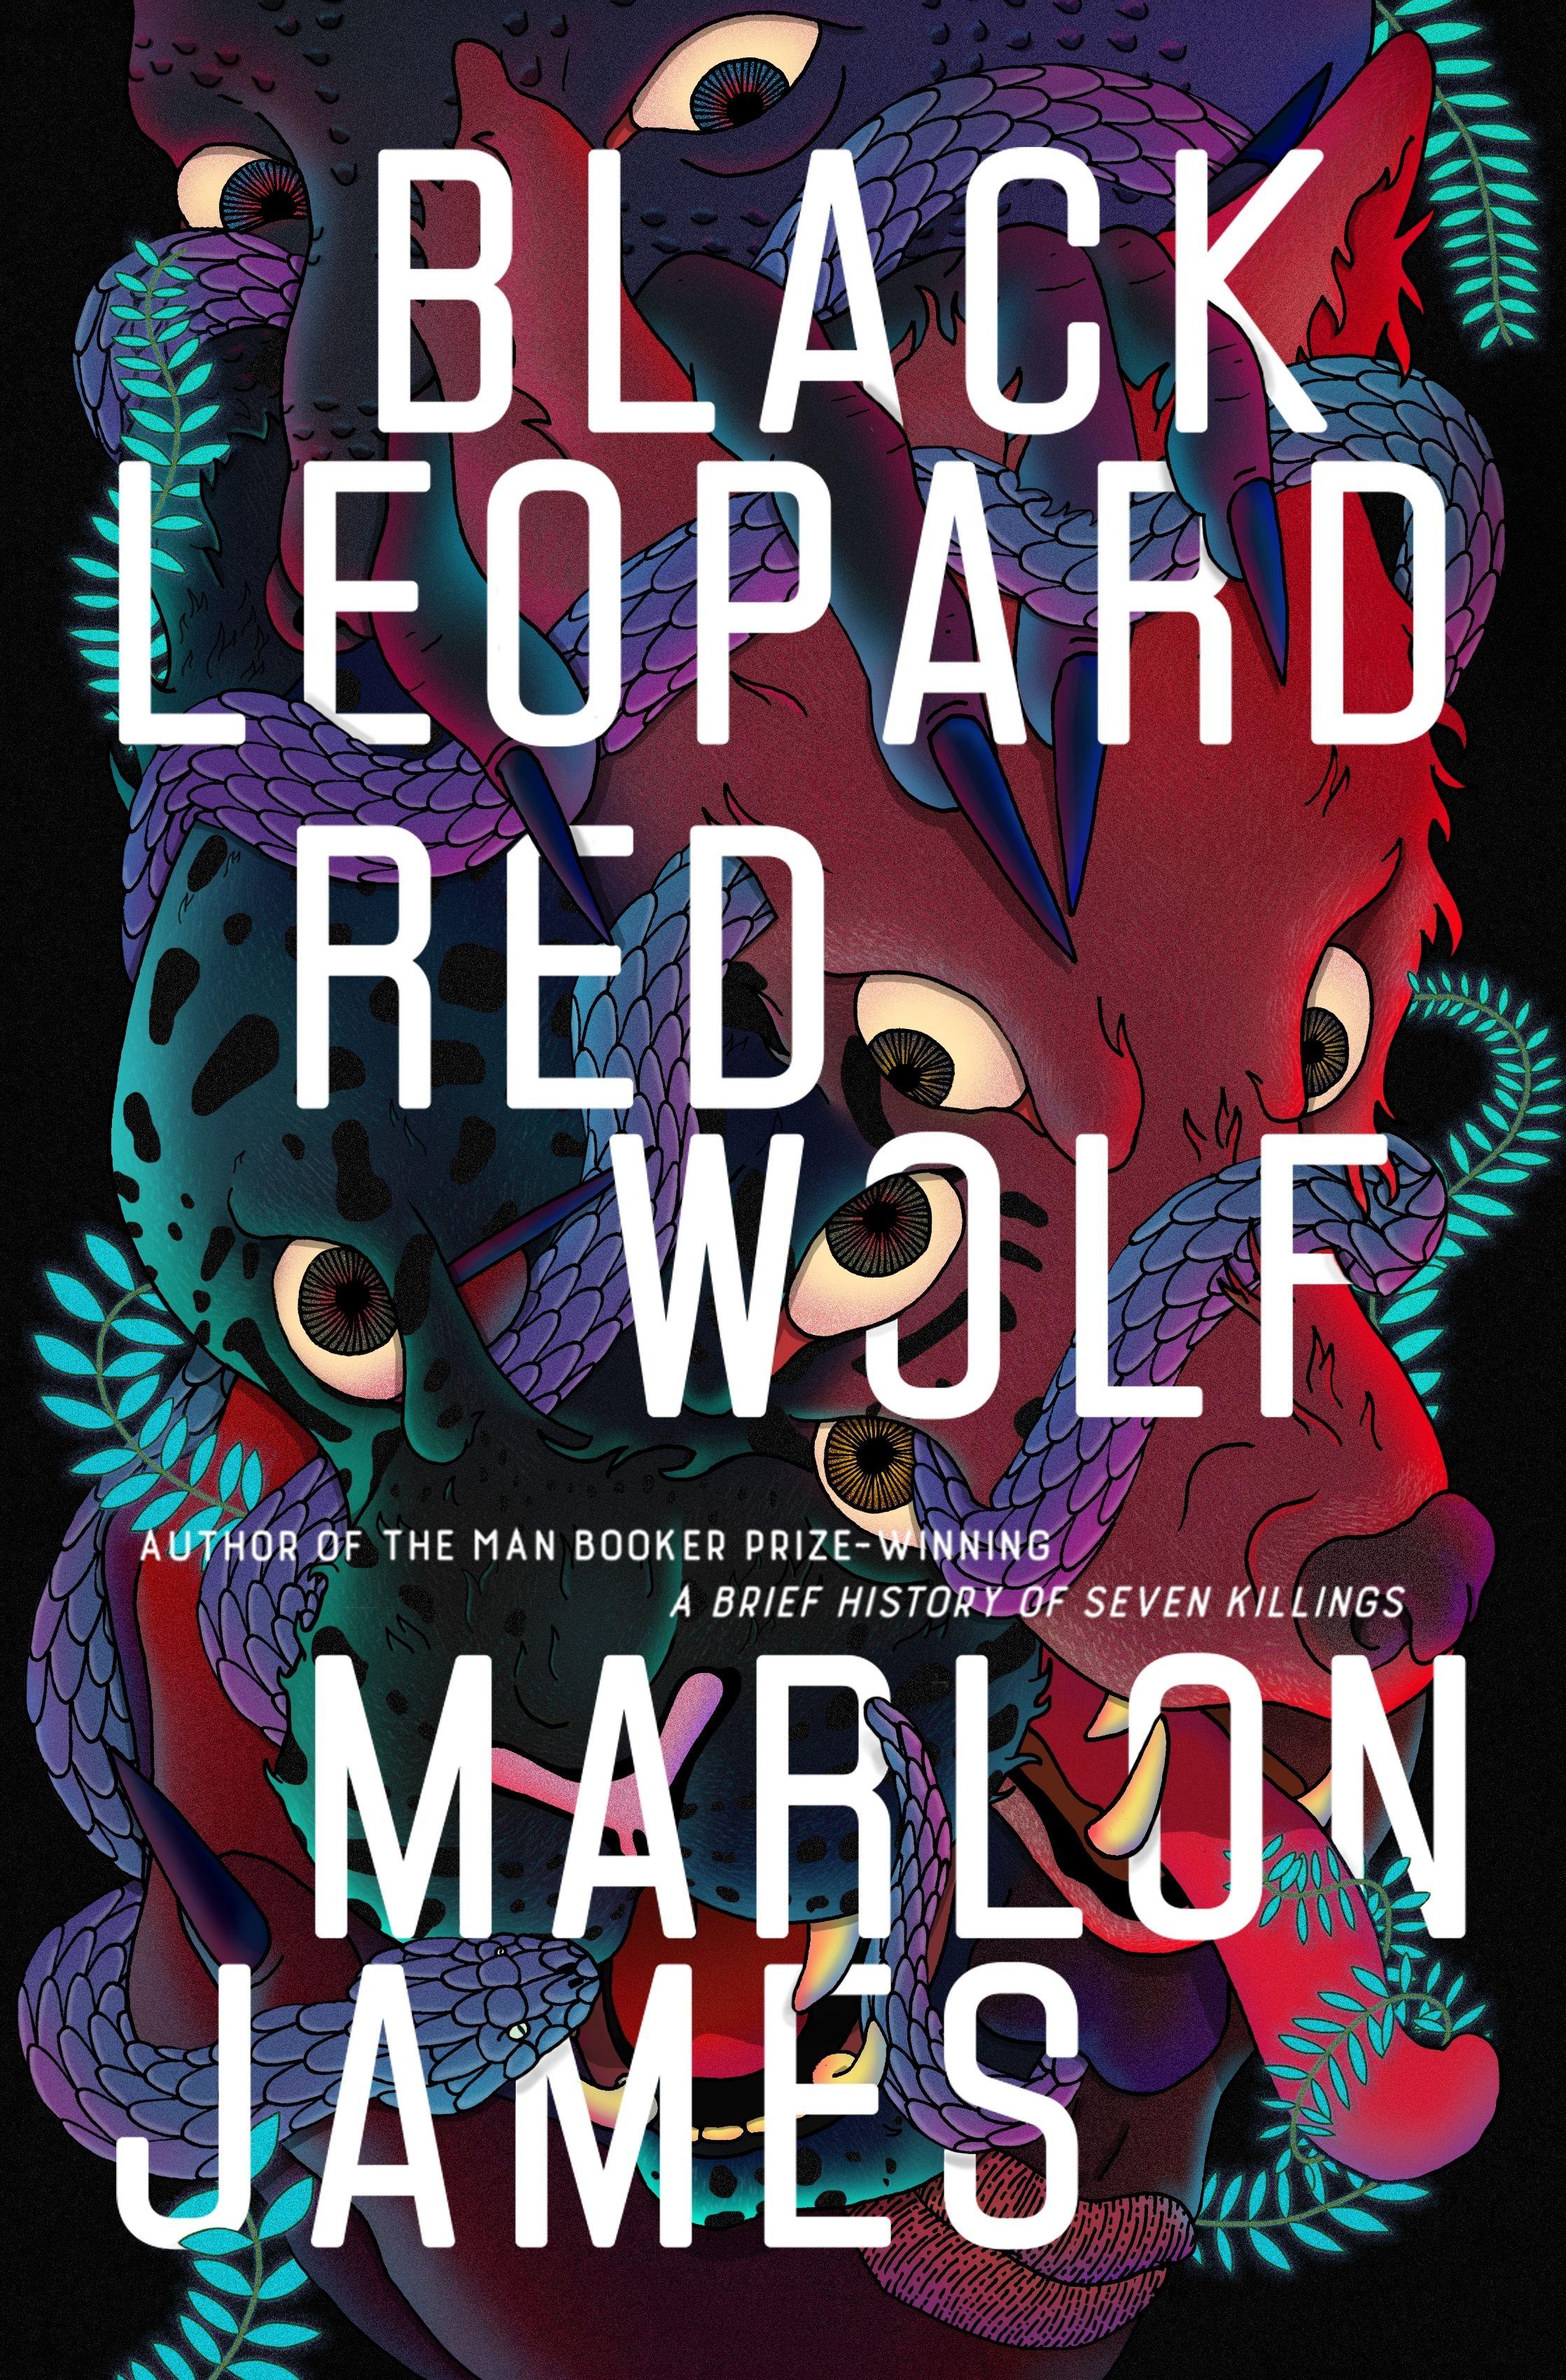 Black and Red Wolf Logo - Black Leopard, Red Wolf by Marlon James - Penguin Books Australia